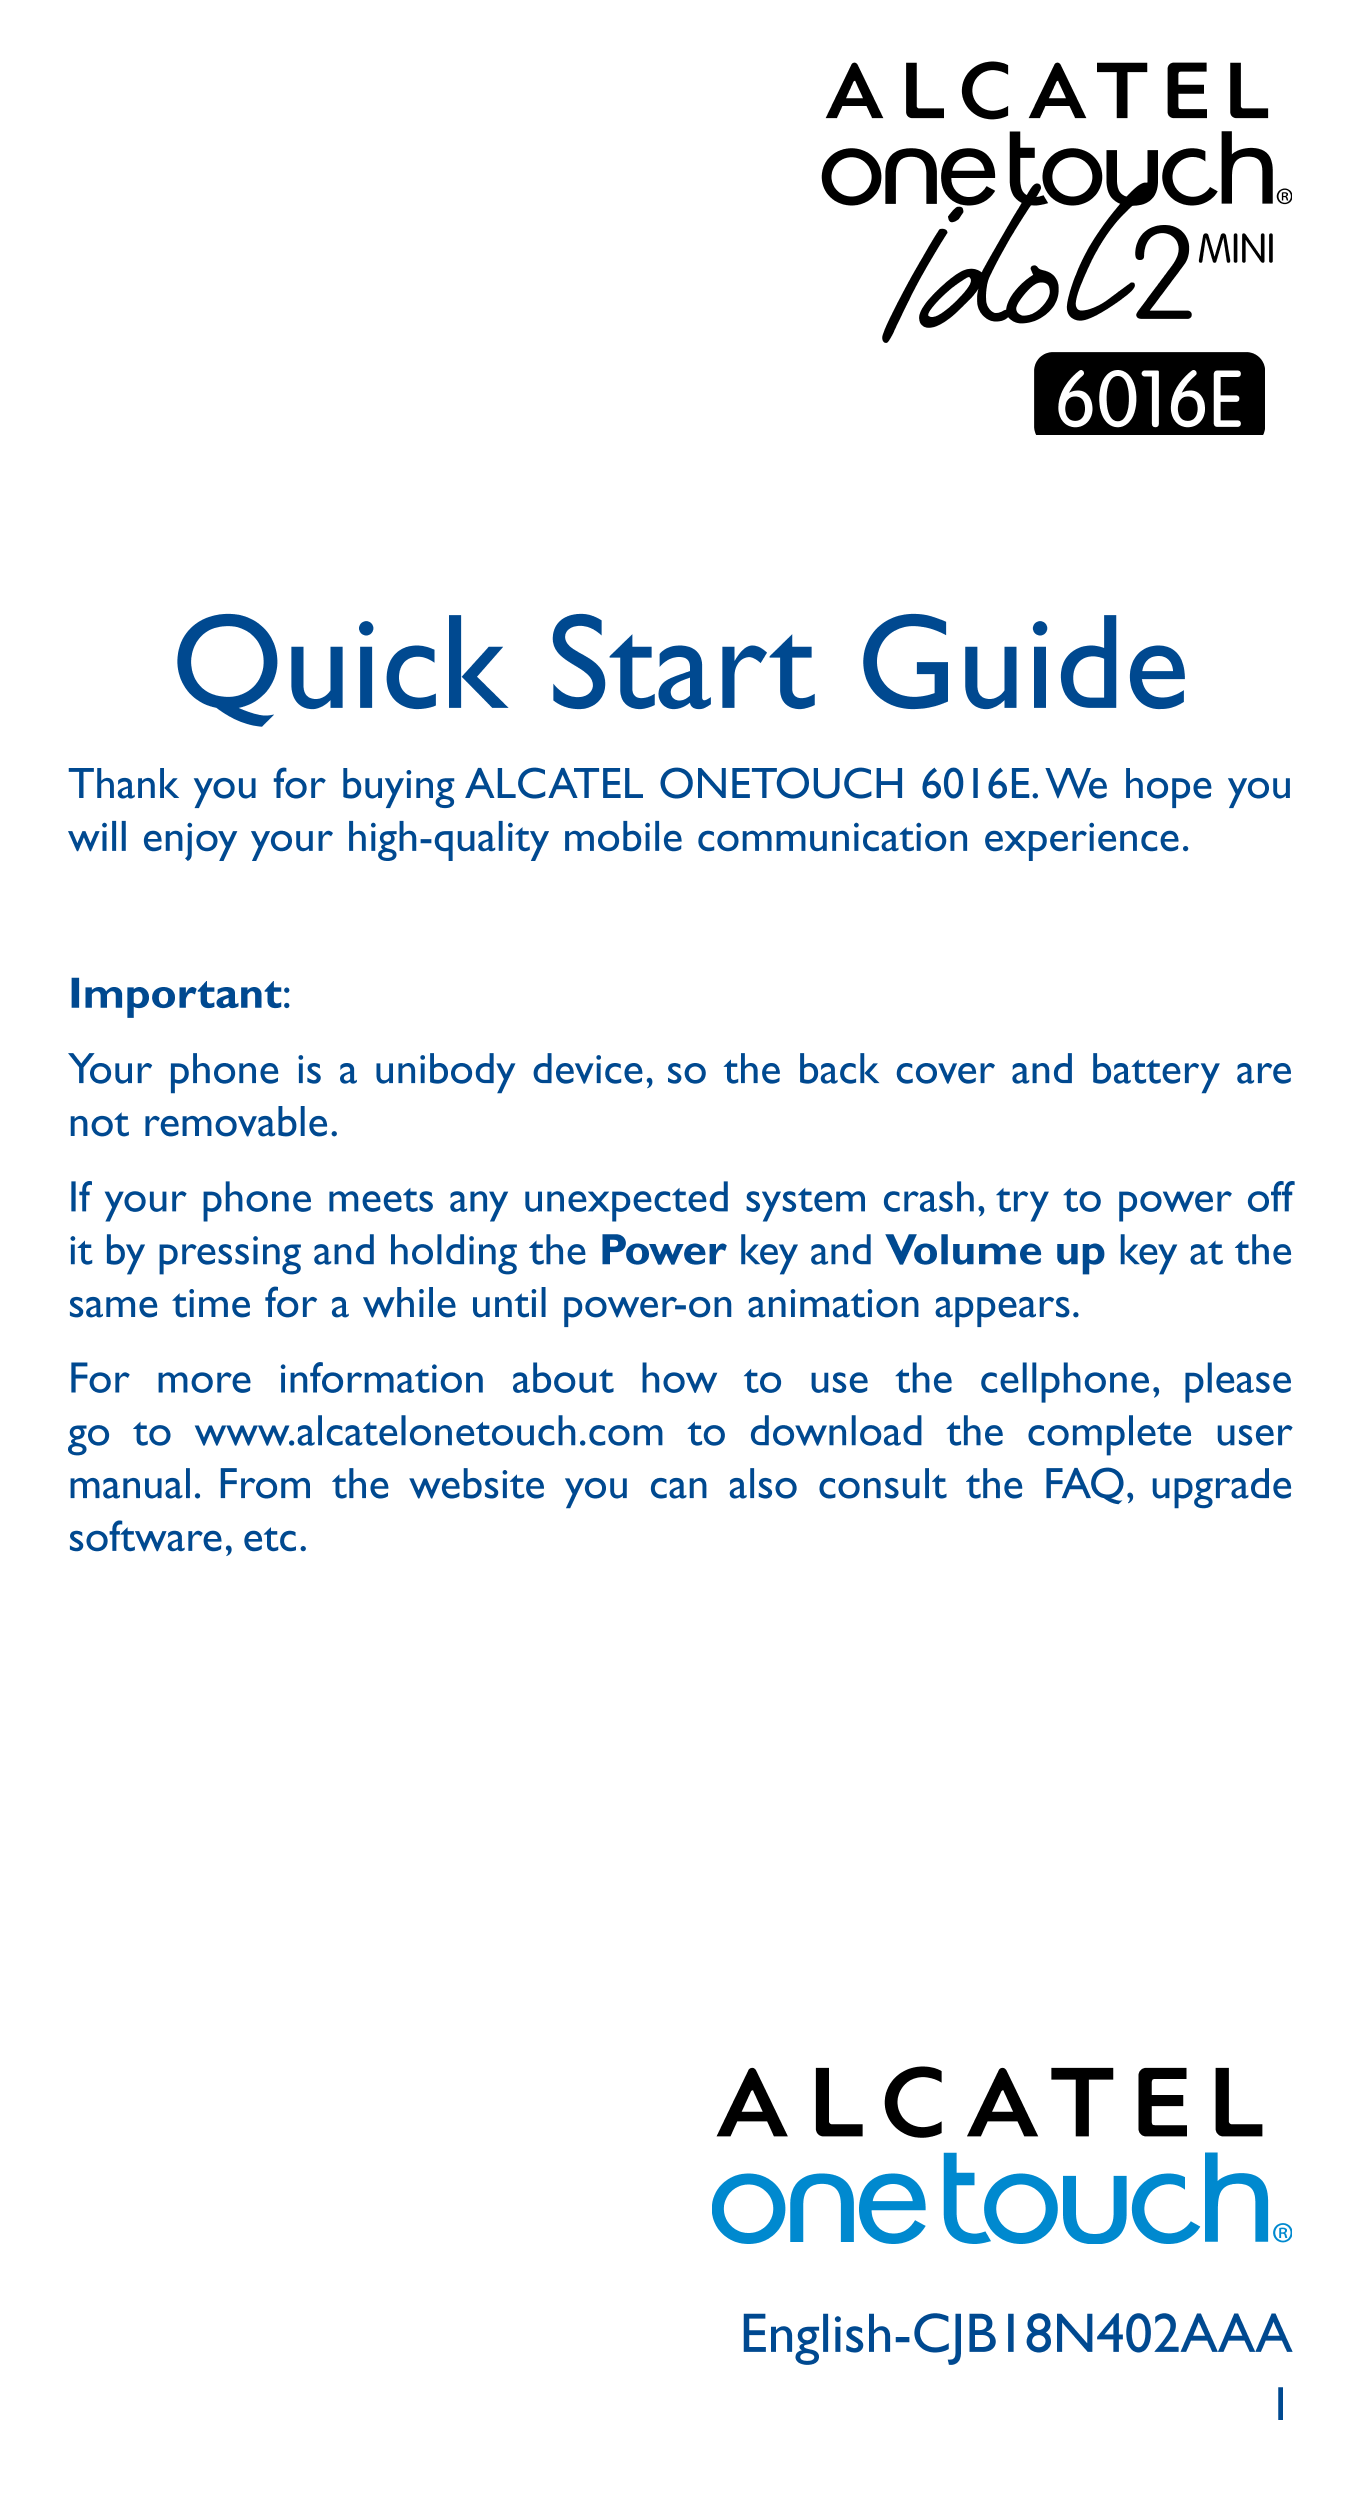 Quick Start Guide
Thank you for buying ALCATEL ONETOUCH 6016E. We hope you 
will enjoy your high-quality mobile communication ex